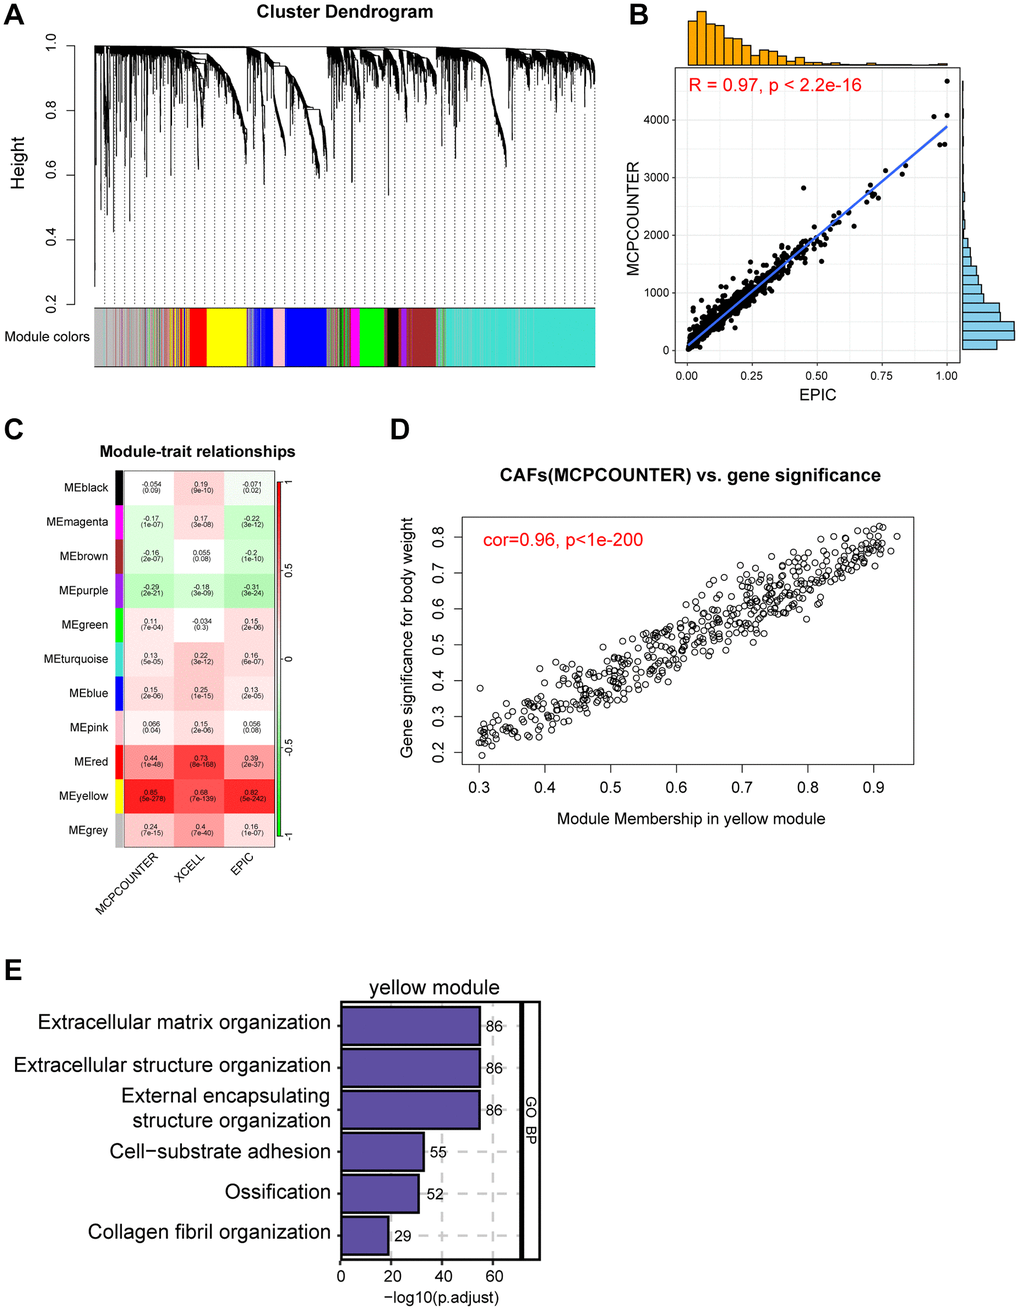 Screening for CAF-related genes by WGCNA in breast cancer. (A) The cluster dendrogram constructing the gene modules and module merging. (B) Correlation plot of infiltration of CAFs by EPIC and MCPCOUNTER. (C) Correlation analysis of modules with traits yielded 11 modules, with the yellow module considered to be the most relevant module for CAFs. (D) Scatter plot between the yellow module and MCPCOUNTER. (E) GO enrichment of yellow module genes.